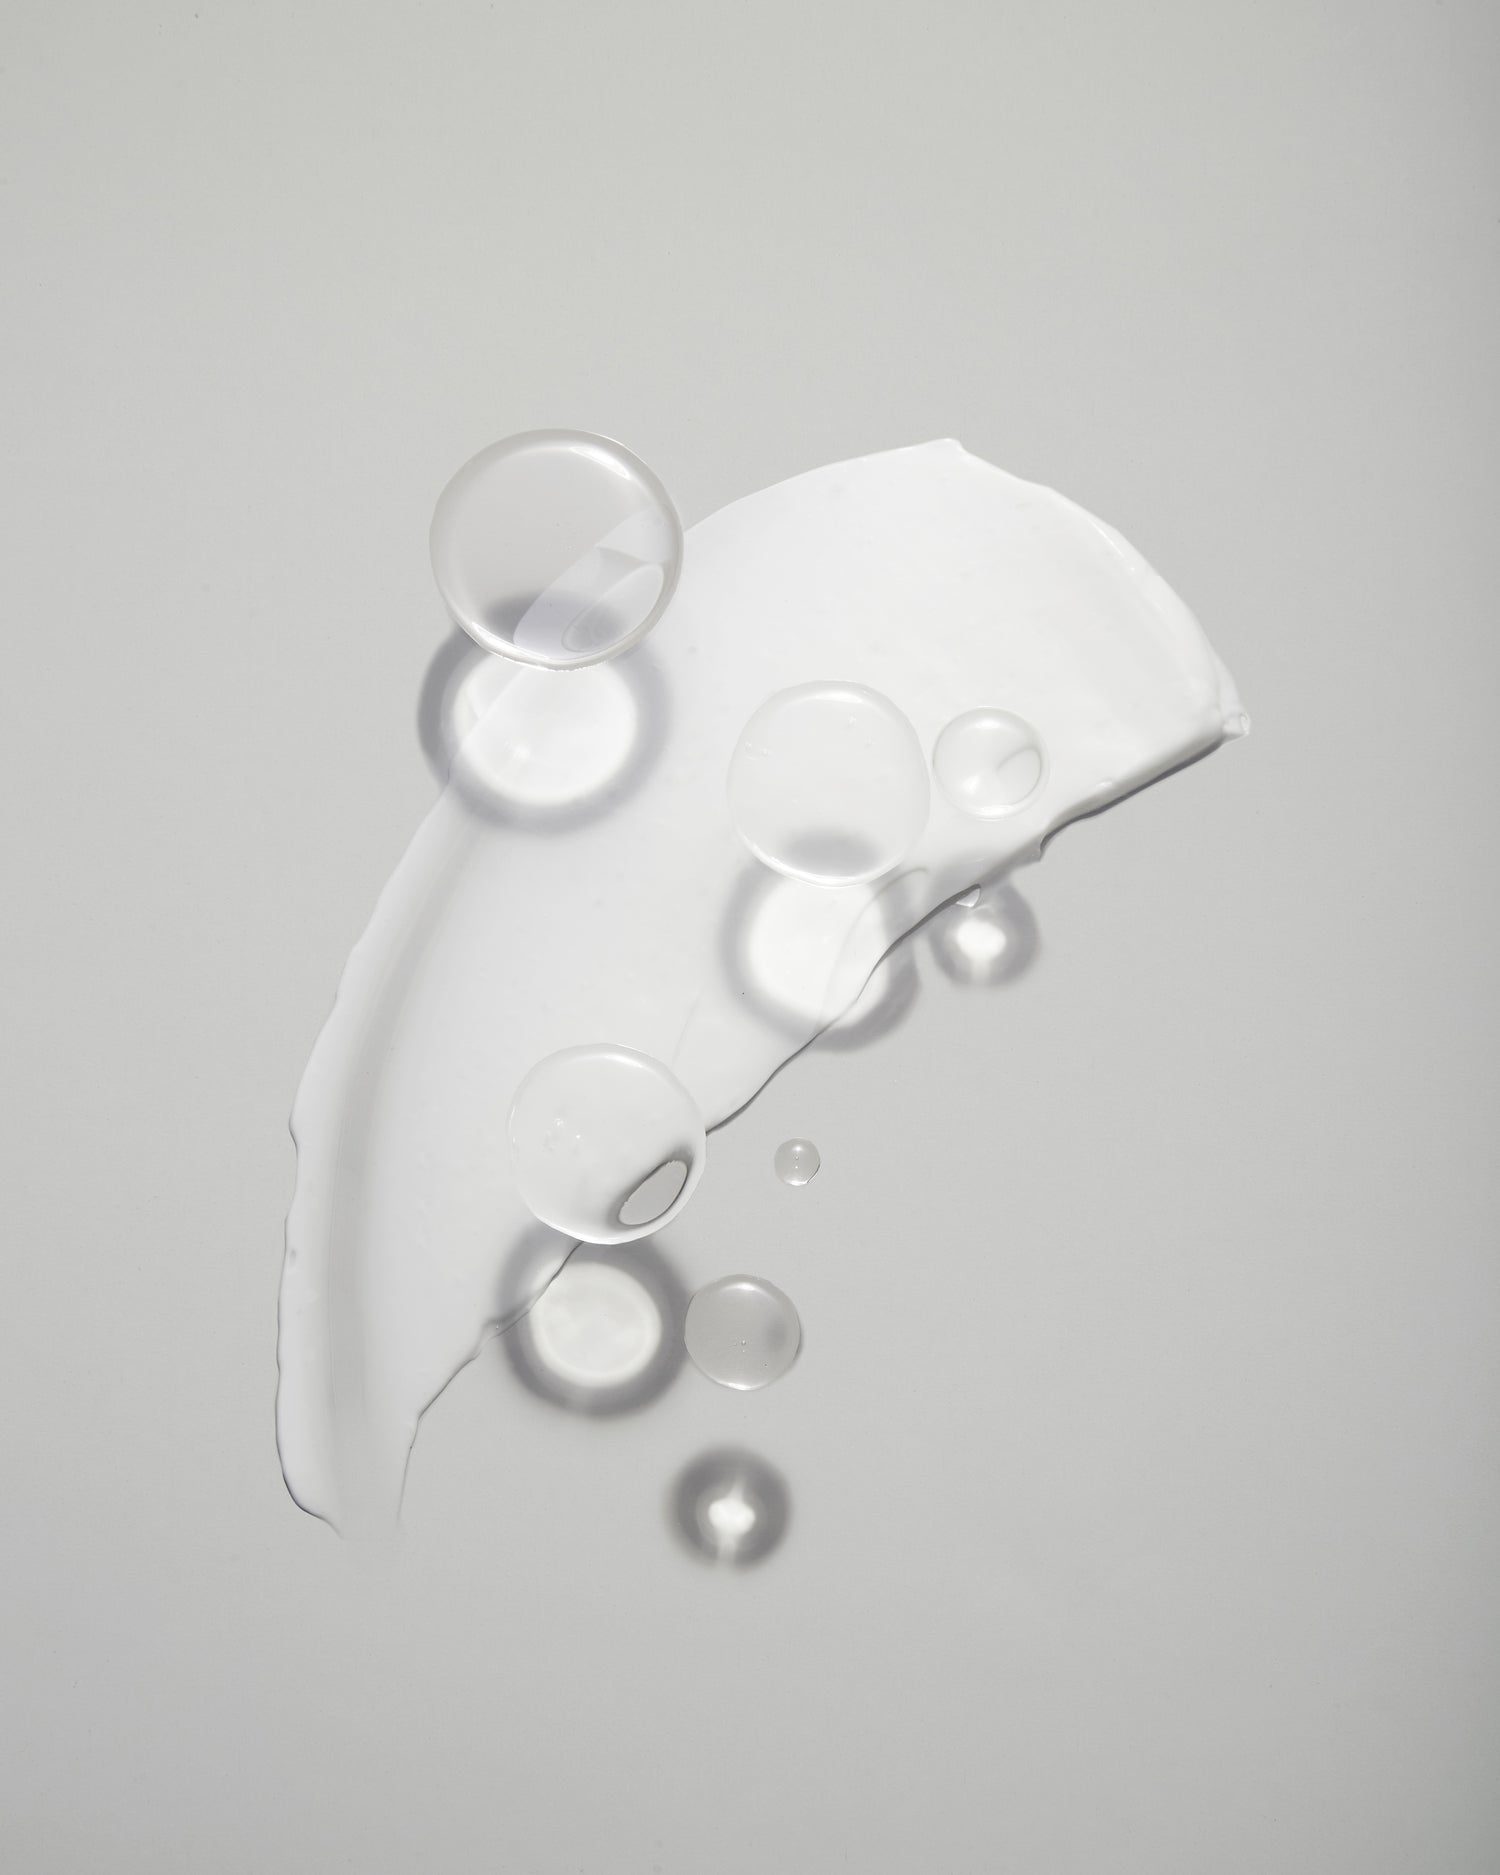 Close-up photo of transparent molecules overlaying a white smear of lotion on a gray background.